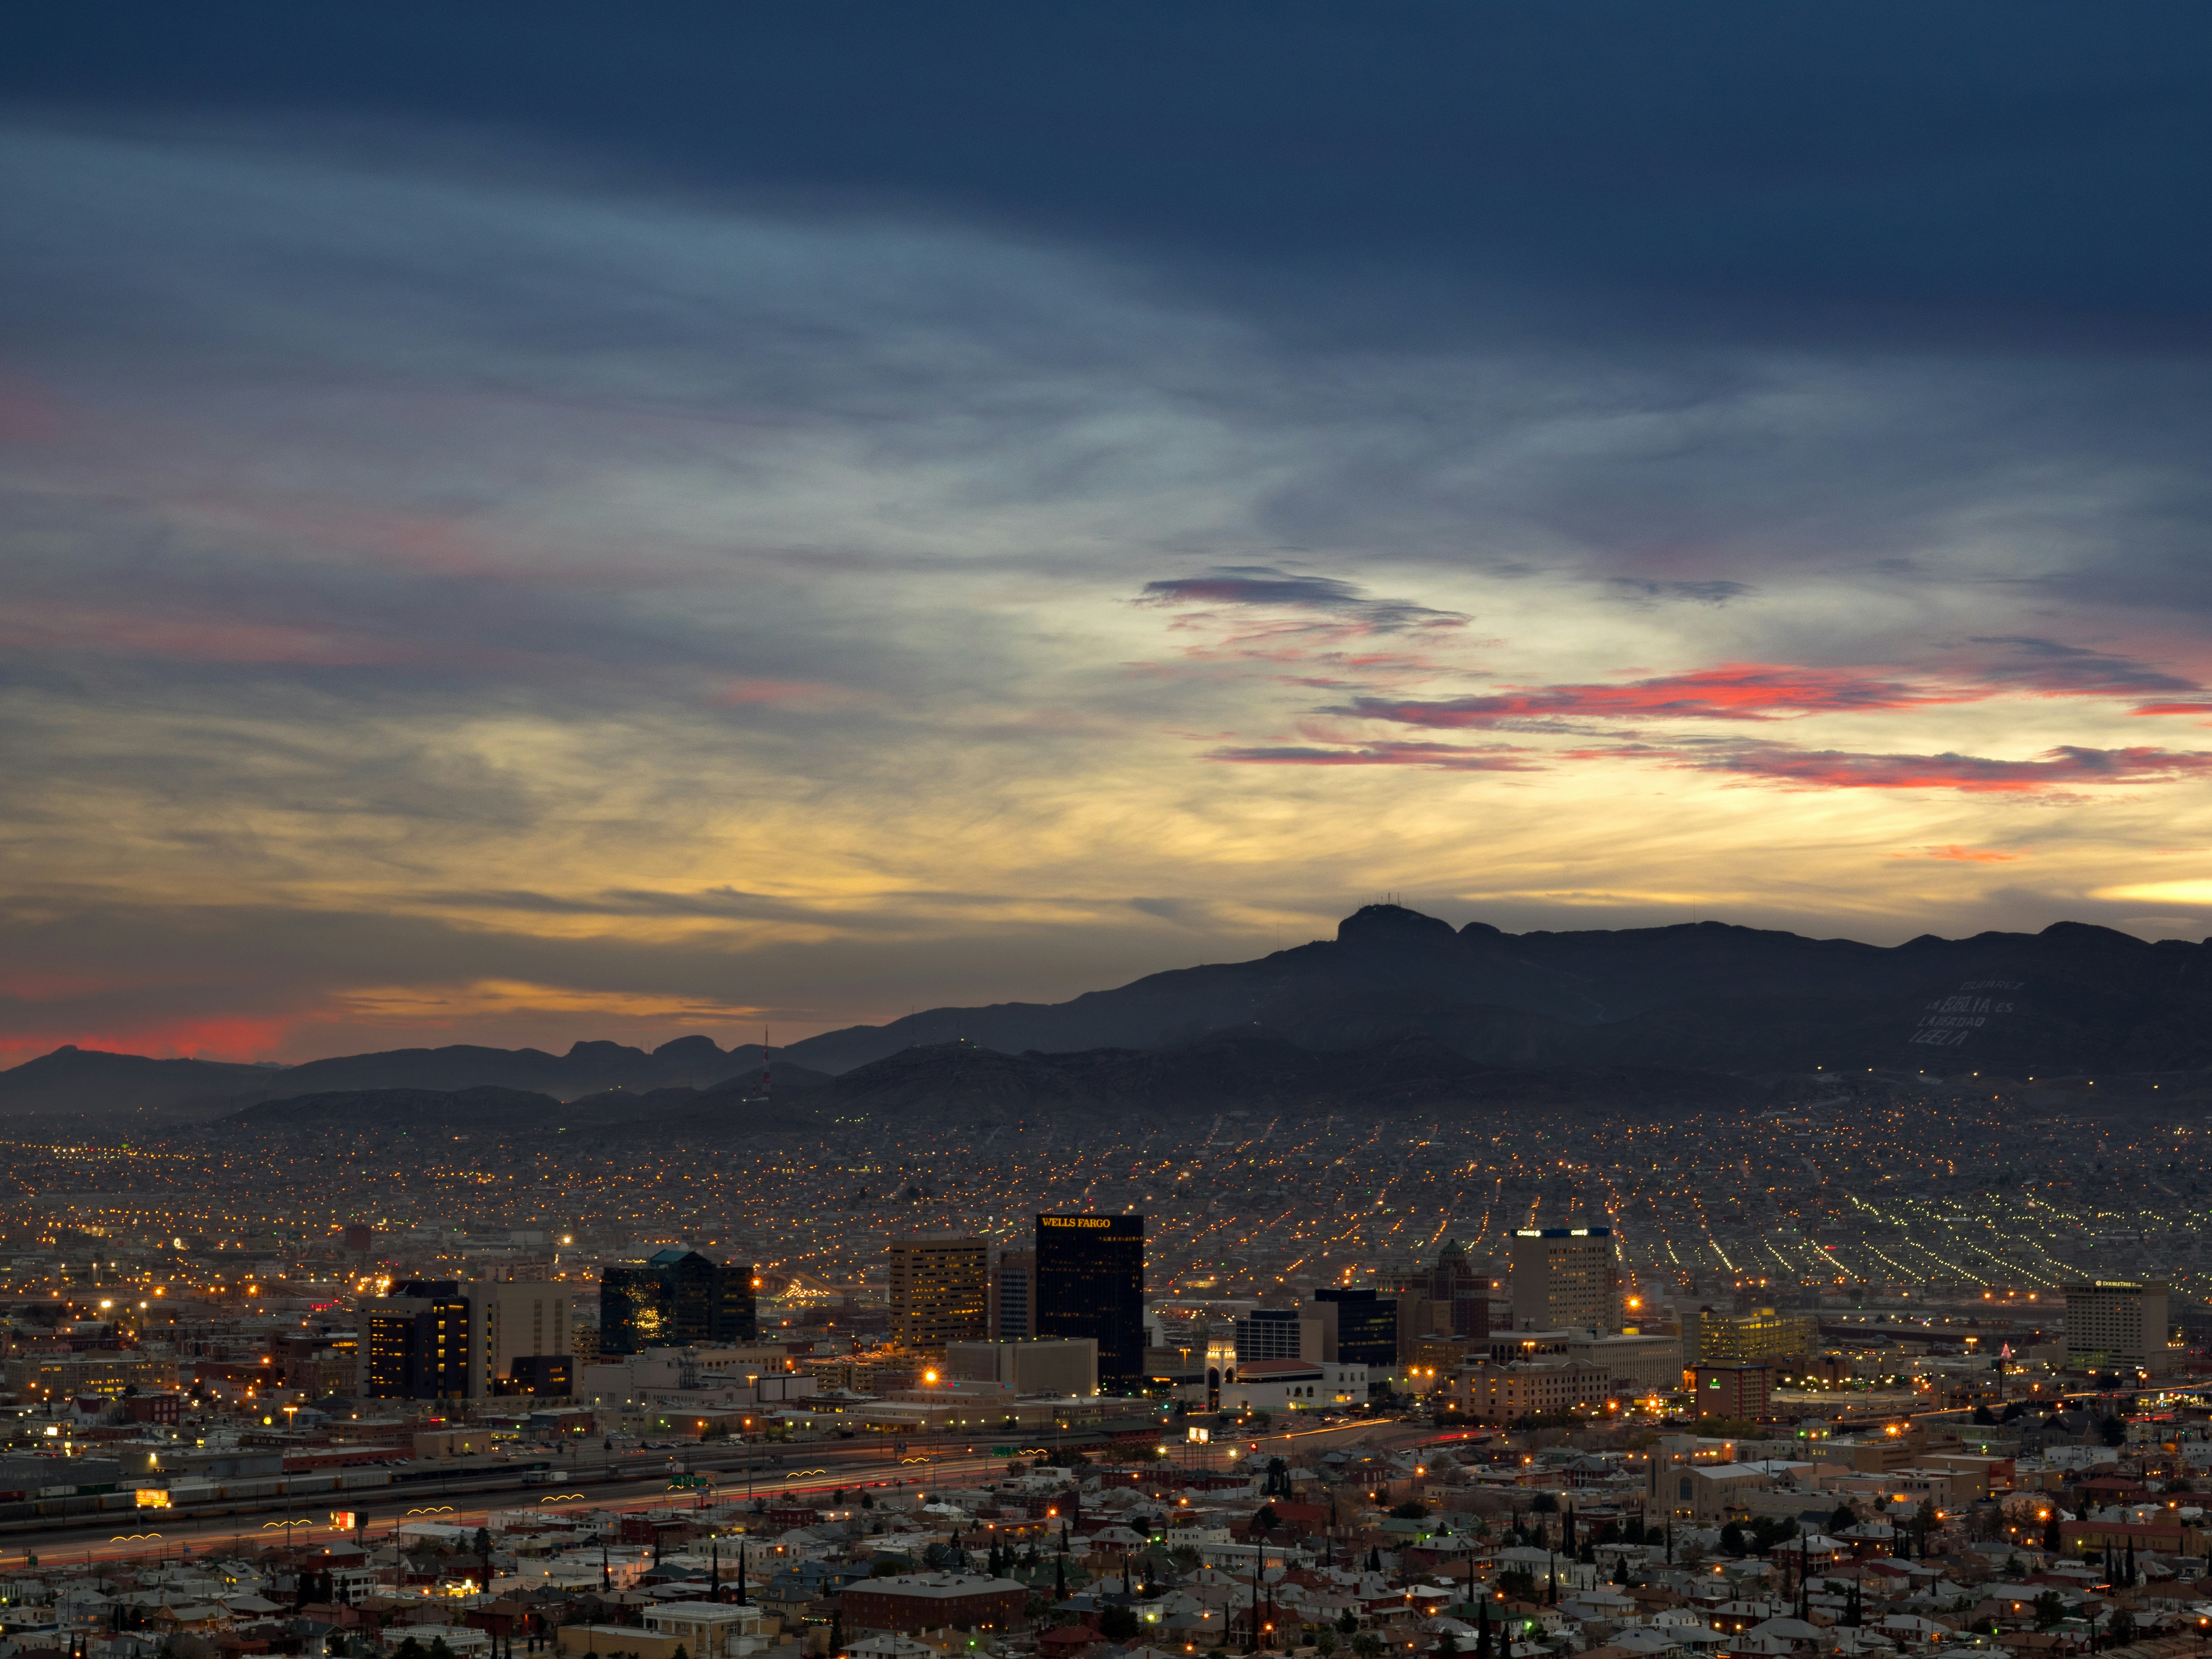 El Paso and nearby mountains.jpg